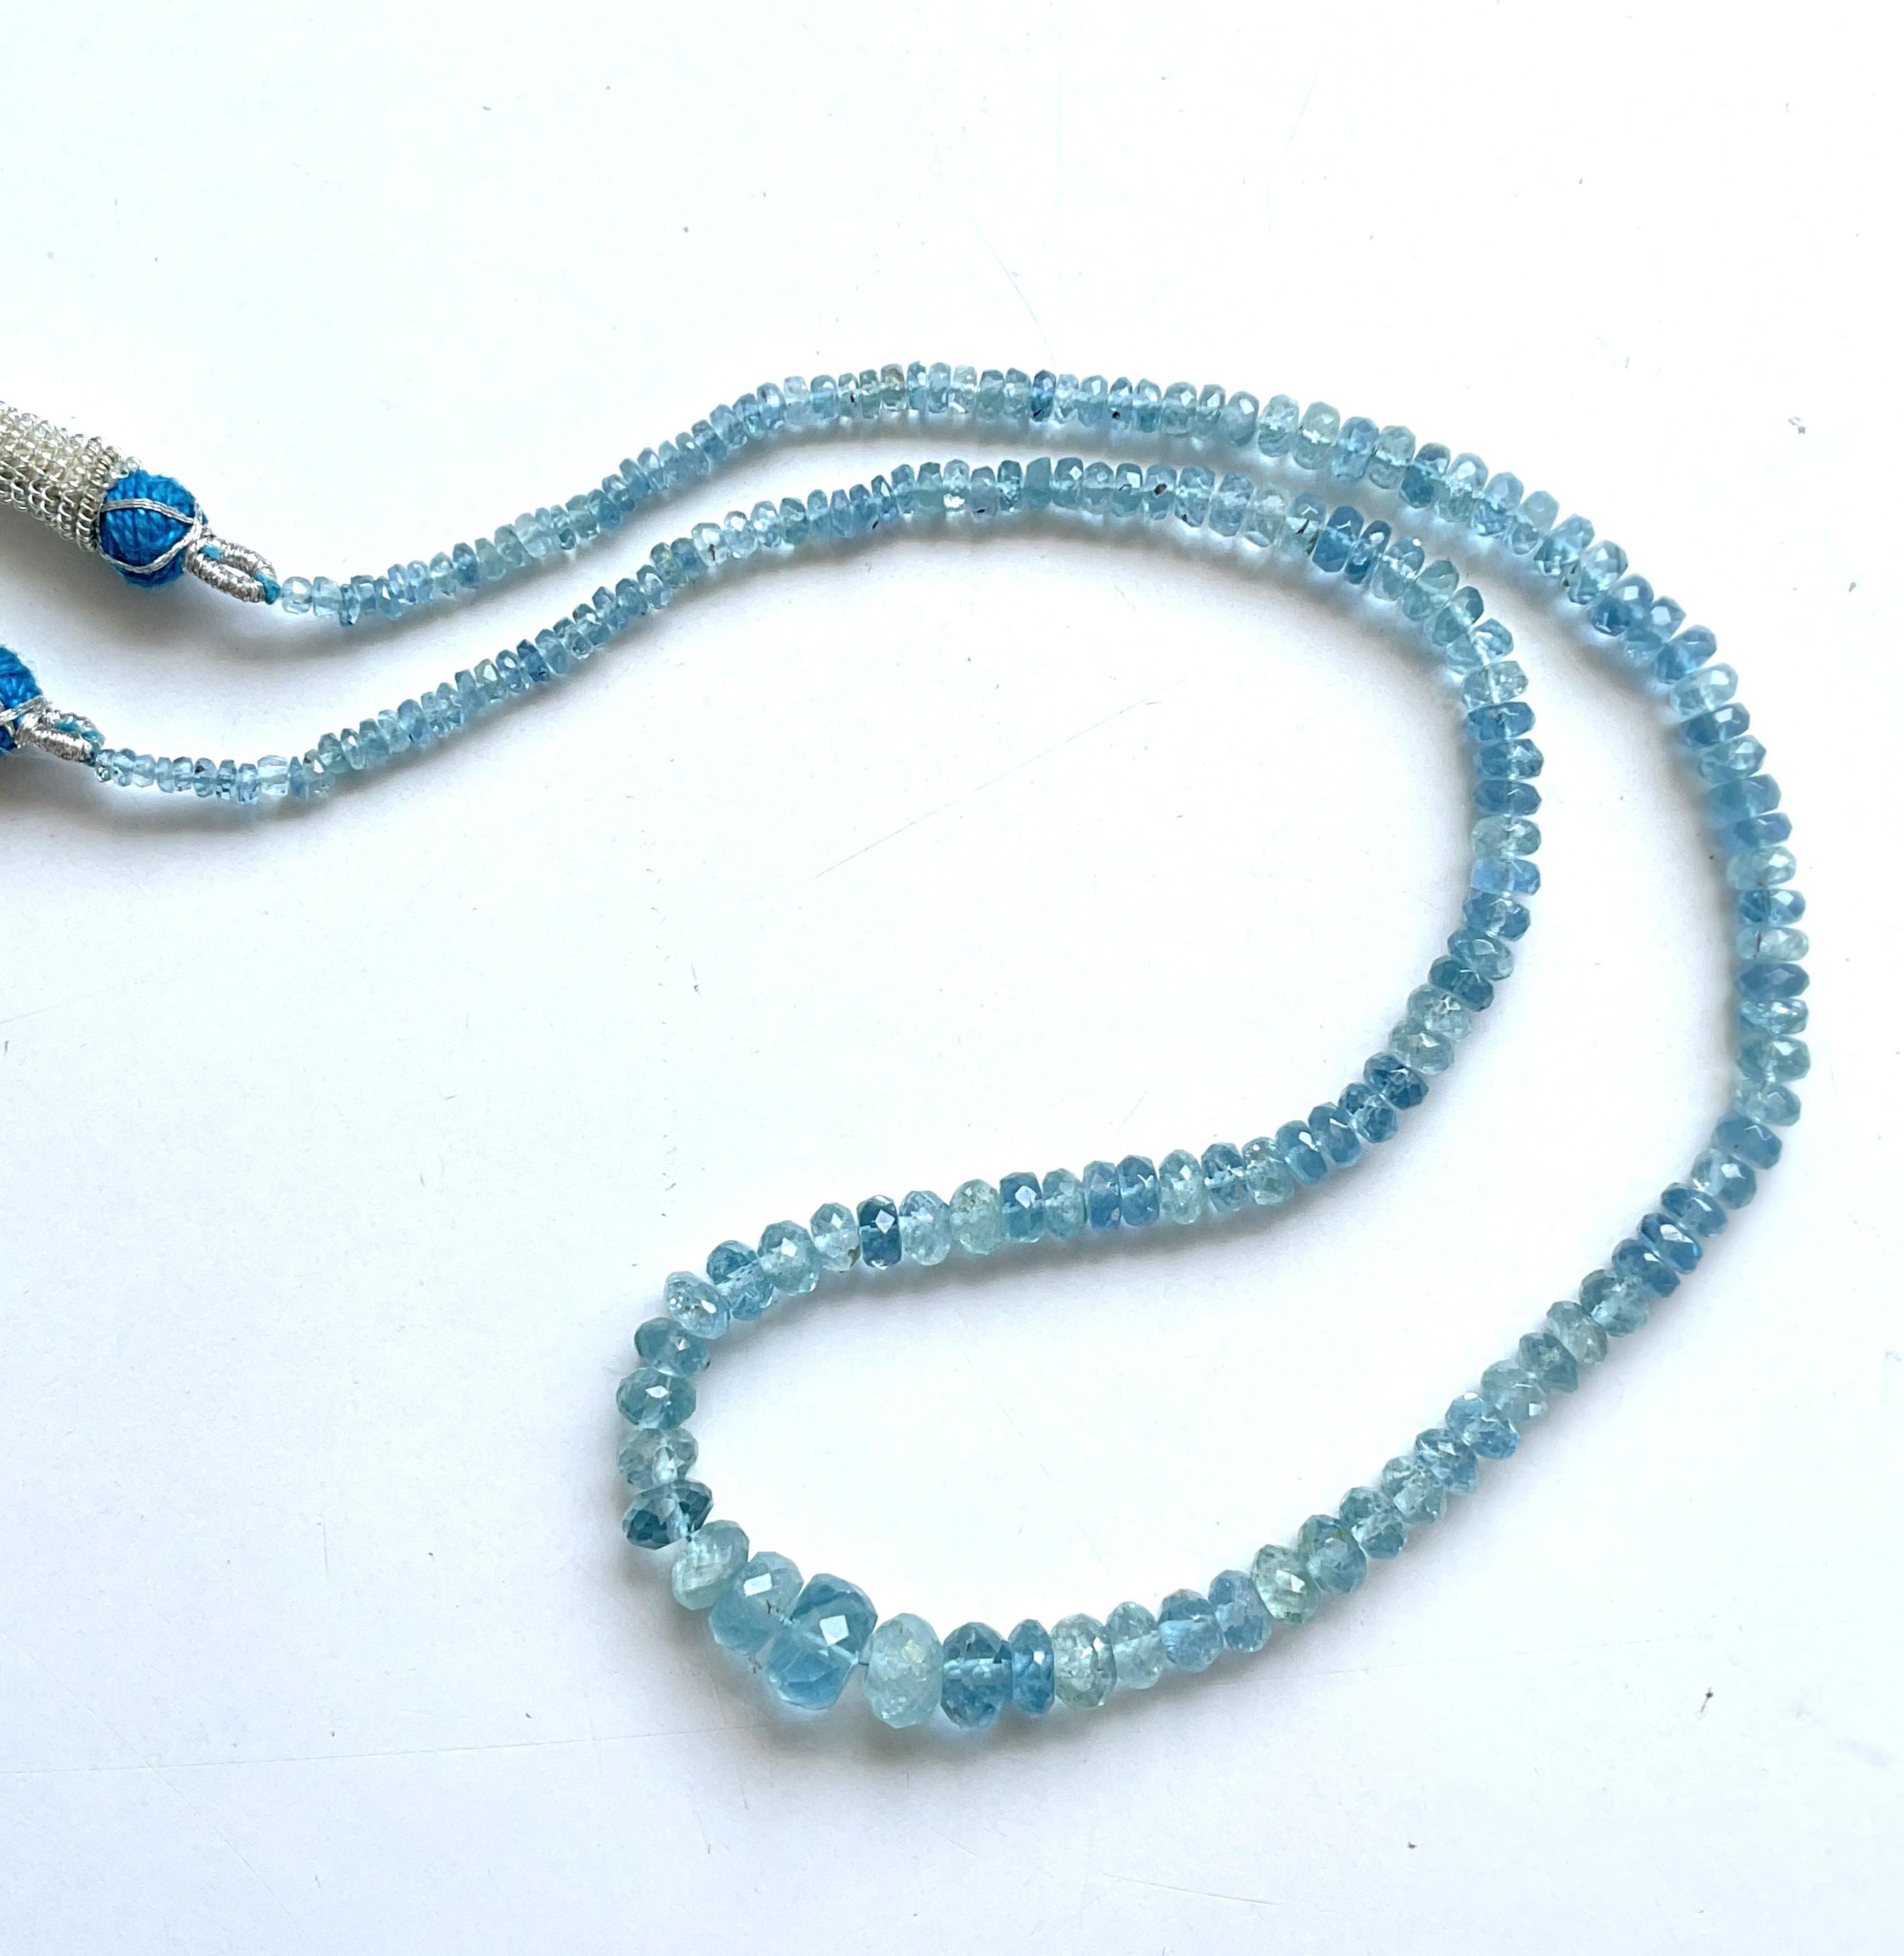 79.85 carats Aquamarine Beaded Necklace 1 Strand Faceted Beads good Quality Gem For Sale 4